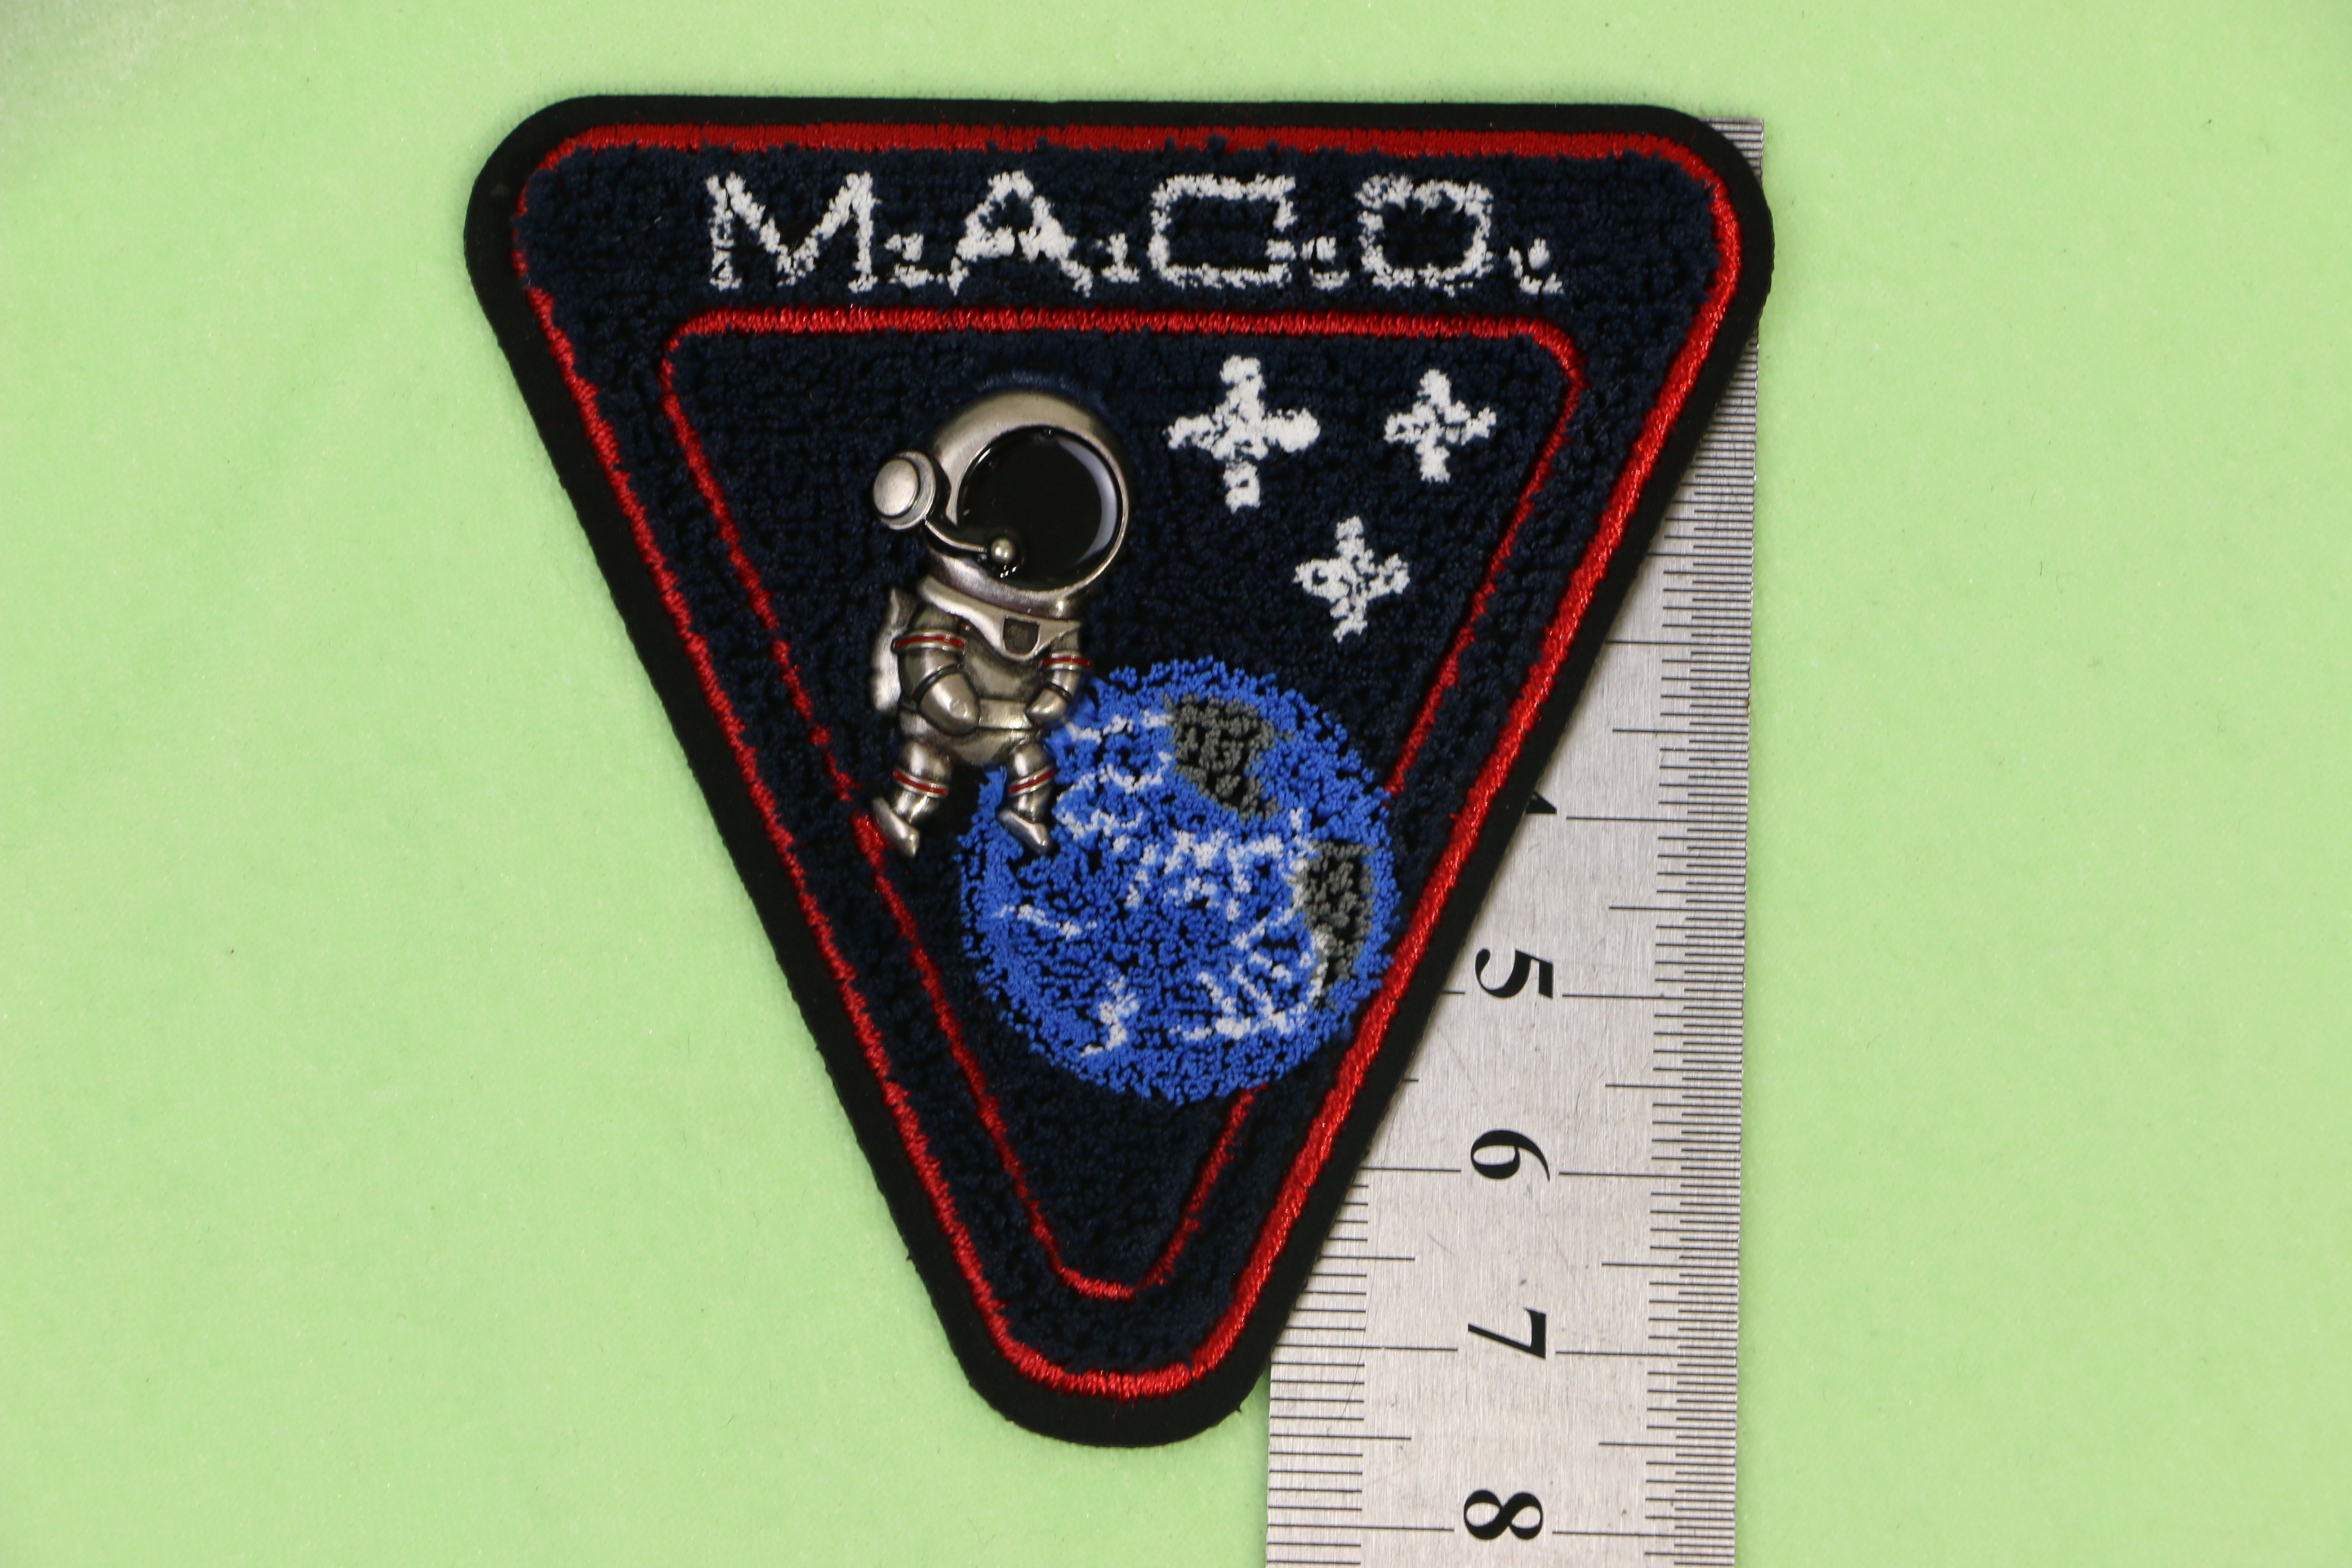  Soft Triangle Toothbrush Astronaut Patch For Iron On Or Sew On Cloth Caps Backpack Bag Manufactures